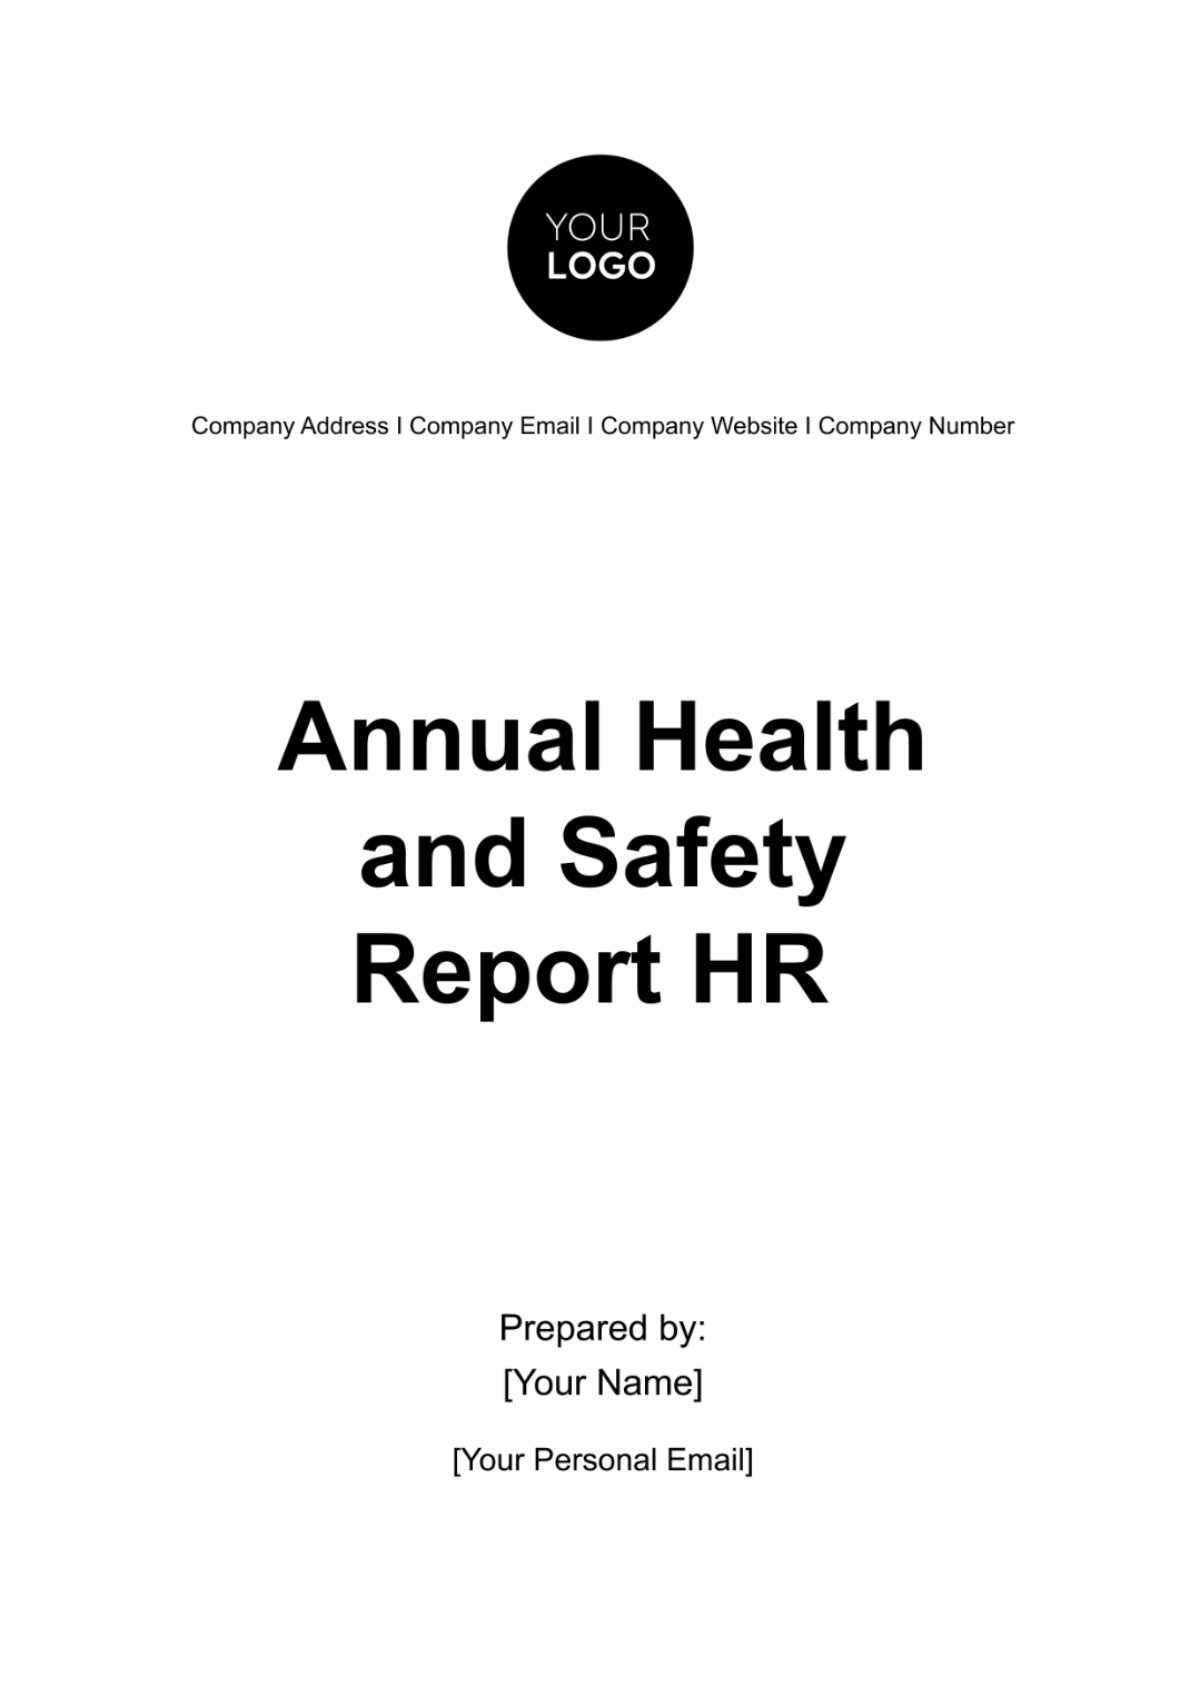 Free Annual Health and Safety Report HR Template